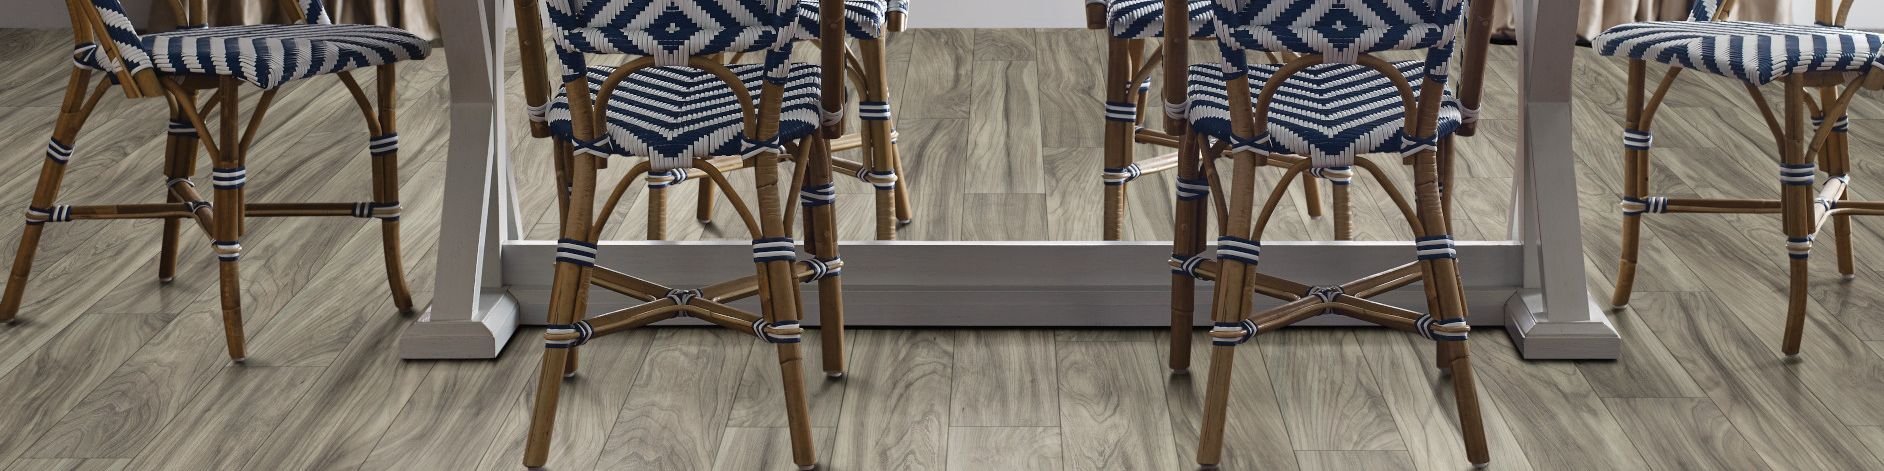 woven dining chairs around a dining table from Butler Floors in Austin